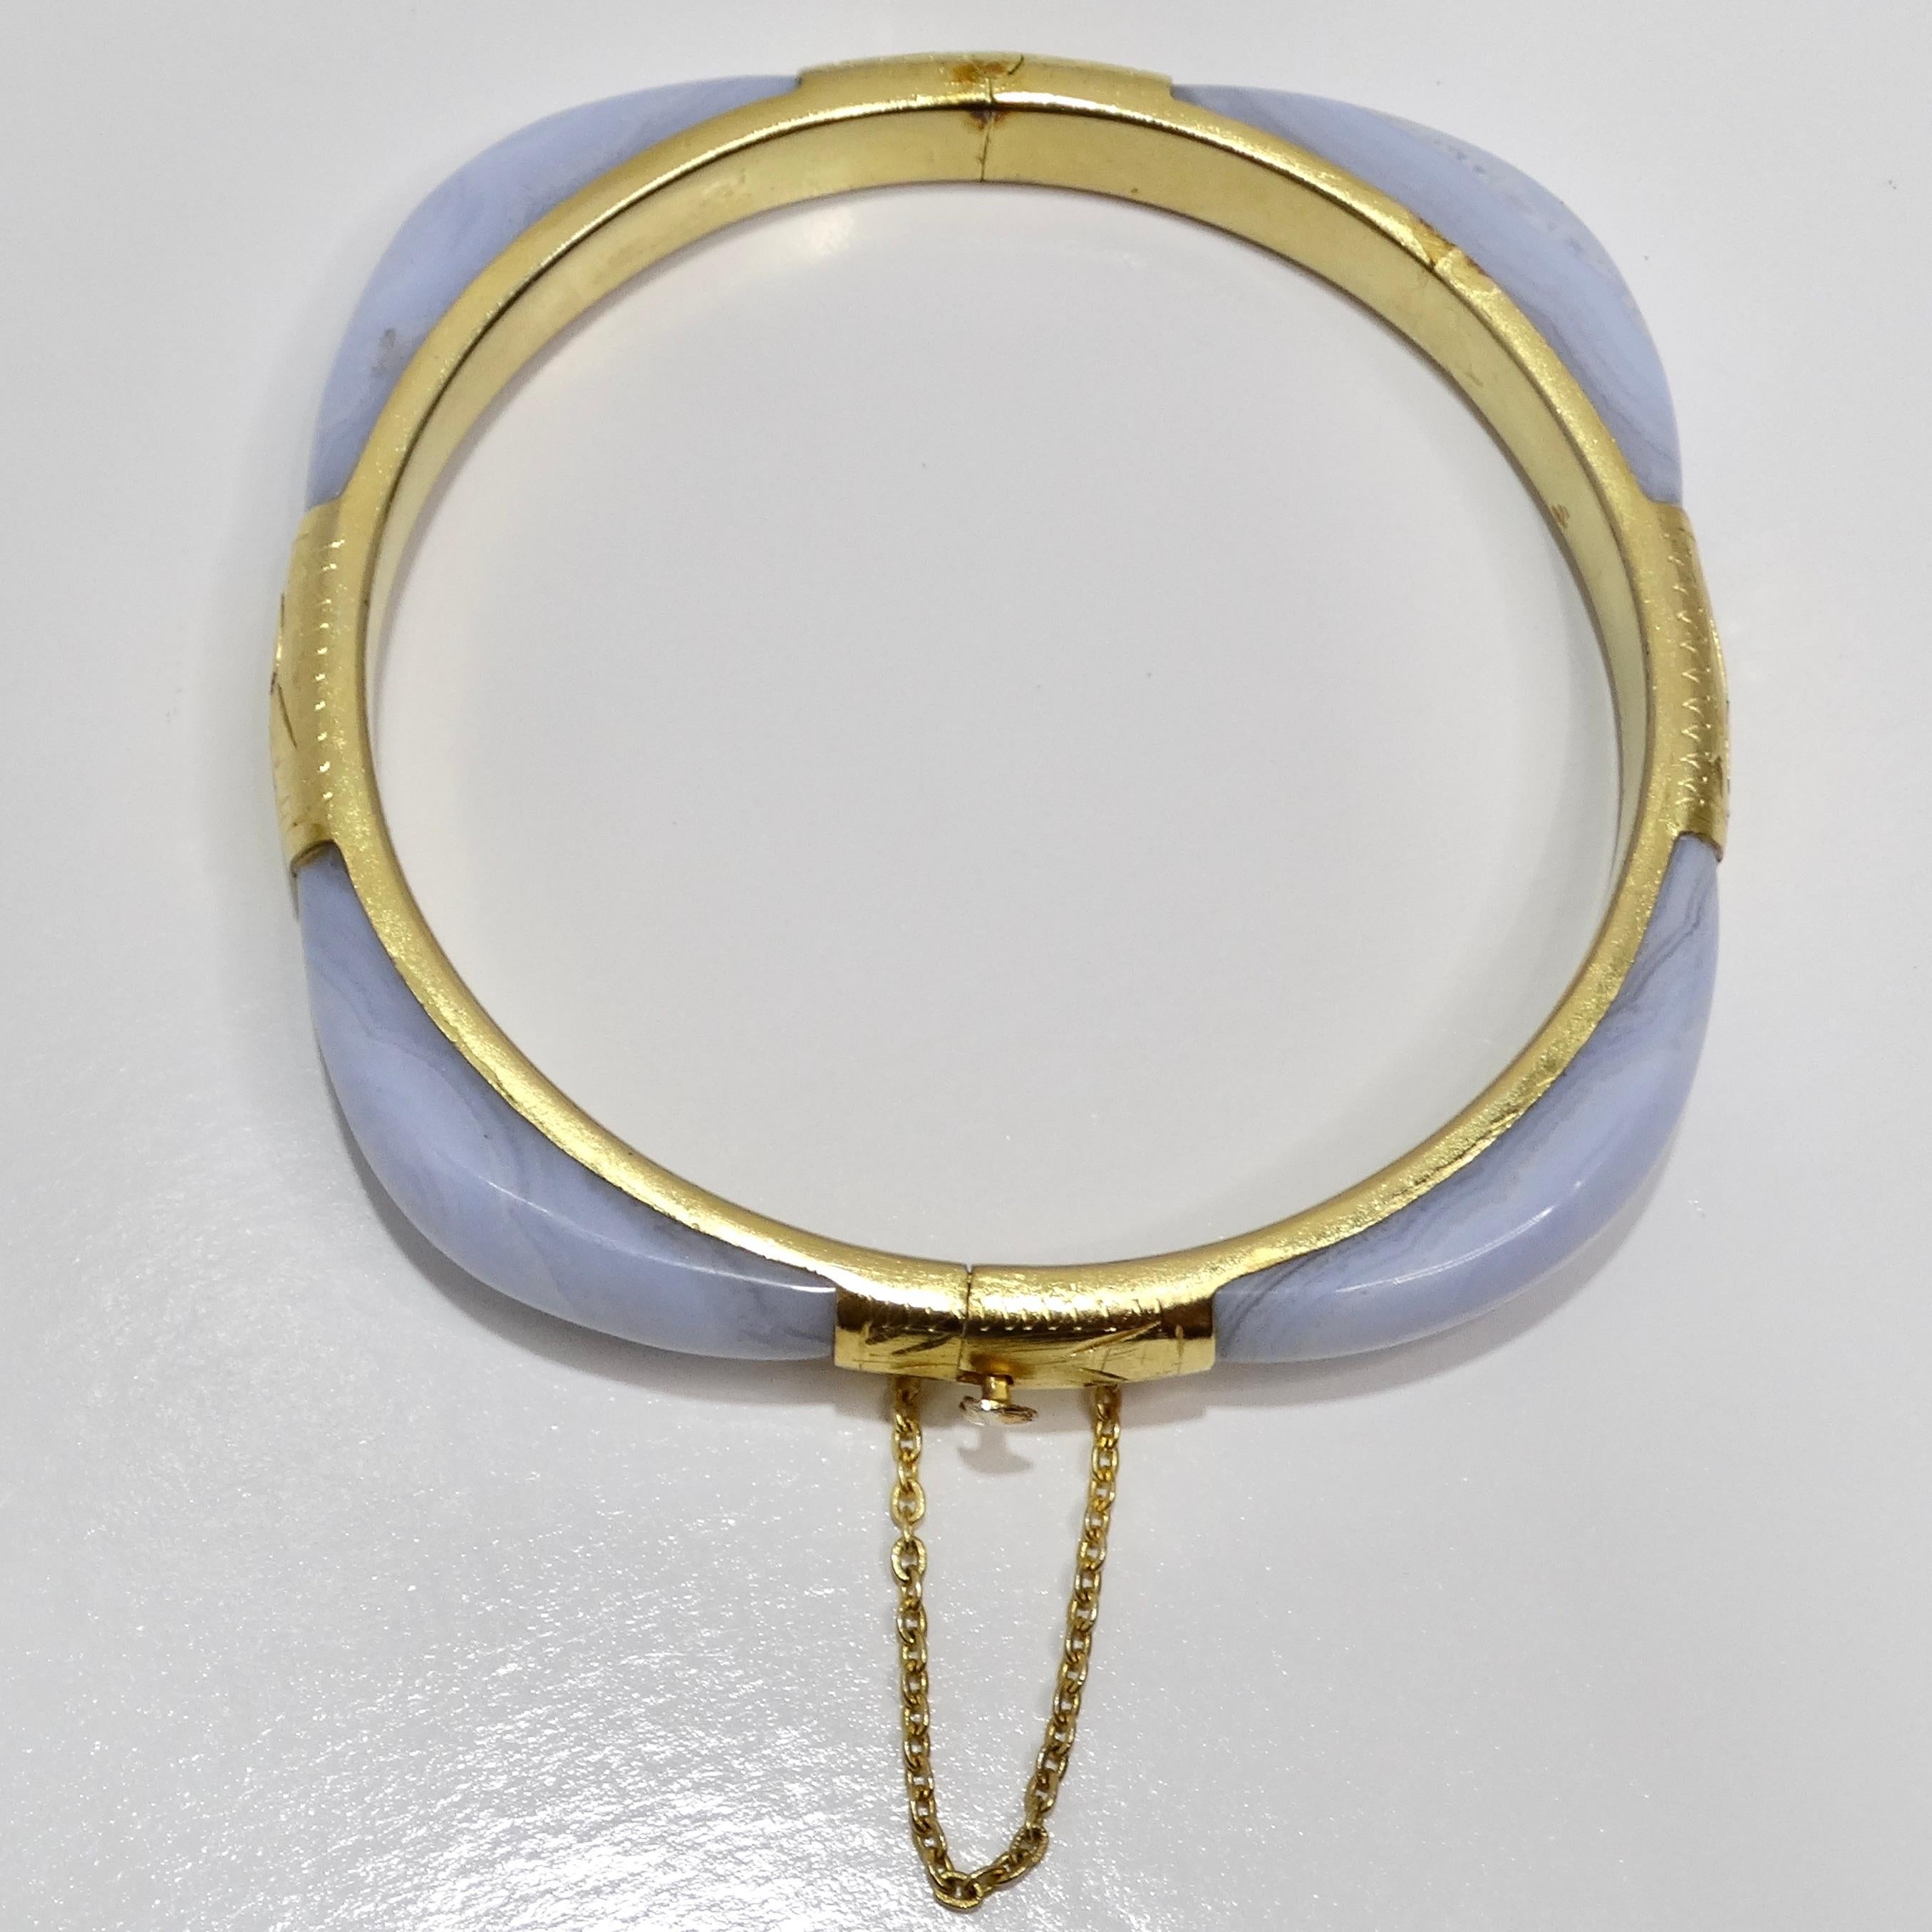 Introducing the 18K Gold Plated 1960s Blue Stone Cuff Bracelet, a stunning vintage piece that blends classic elegance with a touch of vibrant color. This beautiful cuff bracelet features a striking light blue stone, set in a luxurious 18K yellow